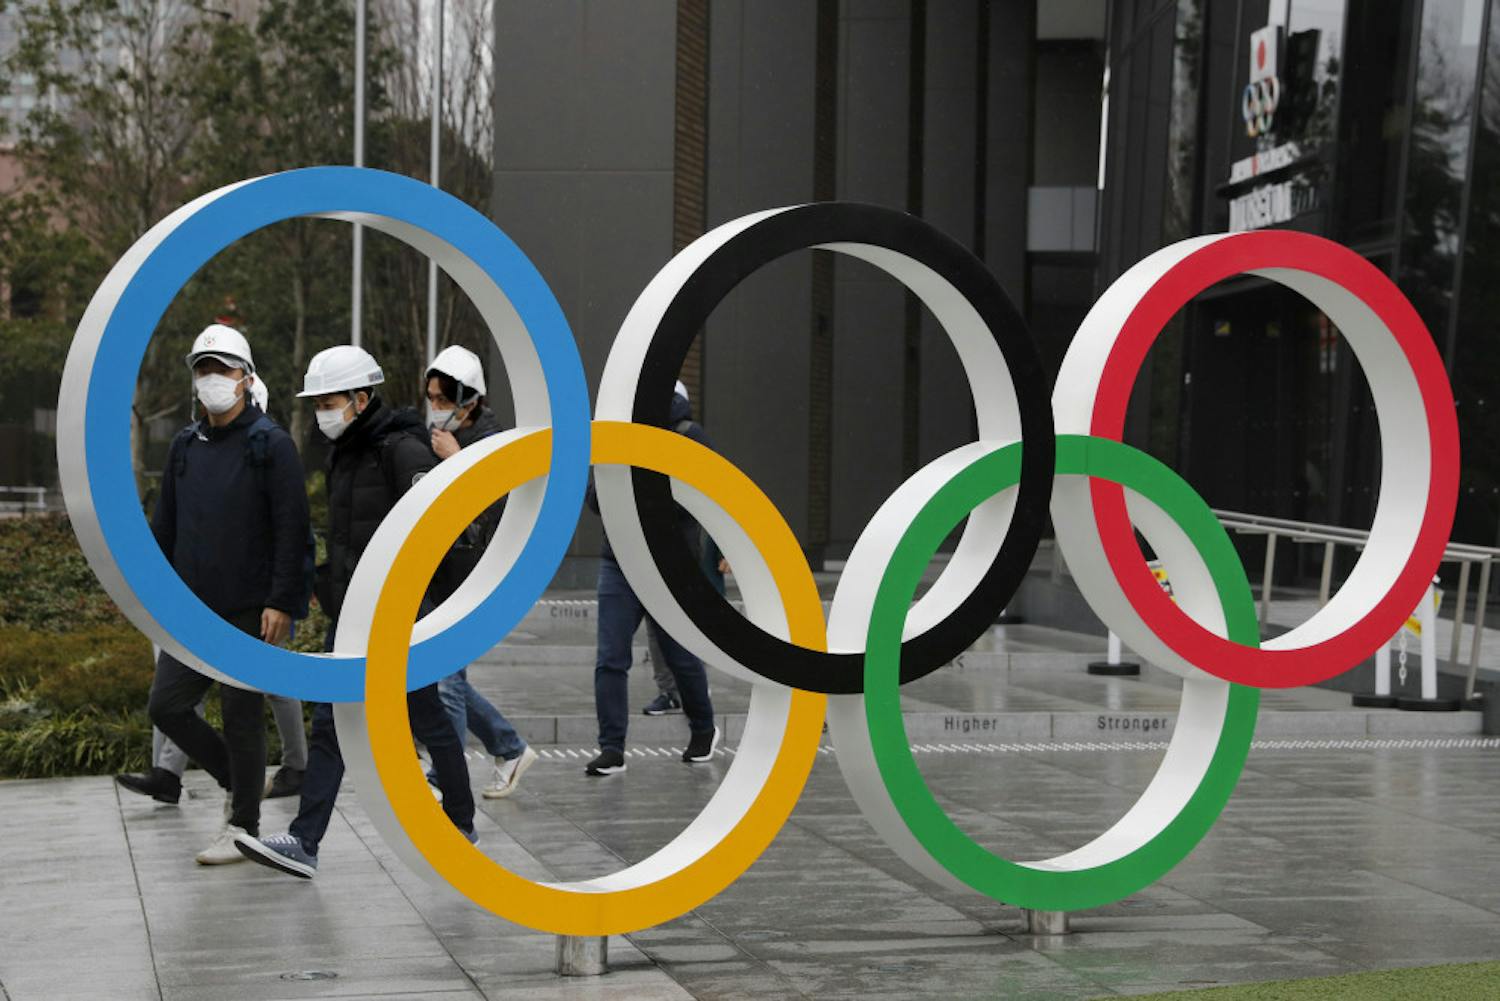 FILE - In this March 4, 2020, file photo, people wearing masks walk past the Olympic rings near the New National Stadium in Tokyo. It's been 2 1/2 months since the Tokyo Olympics were postponed until next year because of the COVID-19 pandemic. So where do the games stand? So far, many ideas about how the Olympic can take place are being floated by the International Olympic Committee, Japanese officials and politicians, and in unsourced Japanese newspaper articles coming from local organizers and politicians. The focus is on soaring costs, fans, or no fans, possible quarantines for athletes, and cutting back to only “the essentials." (AP Photo/Jae C. Hong, File)